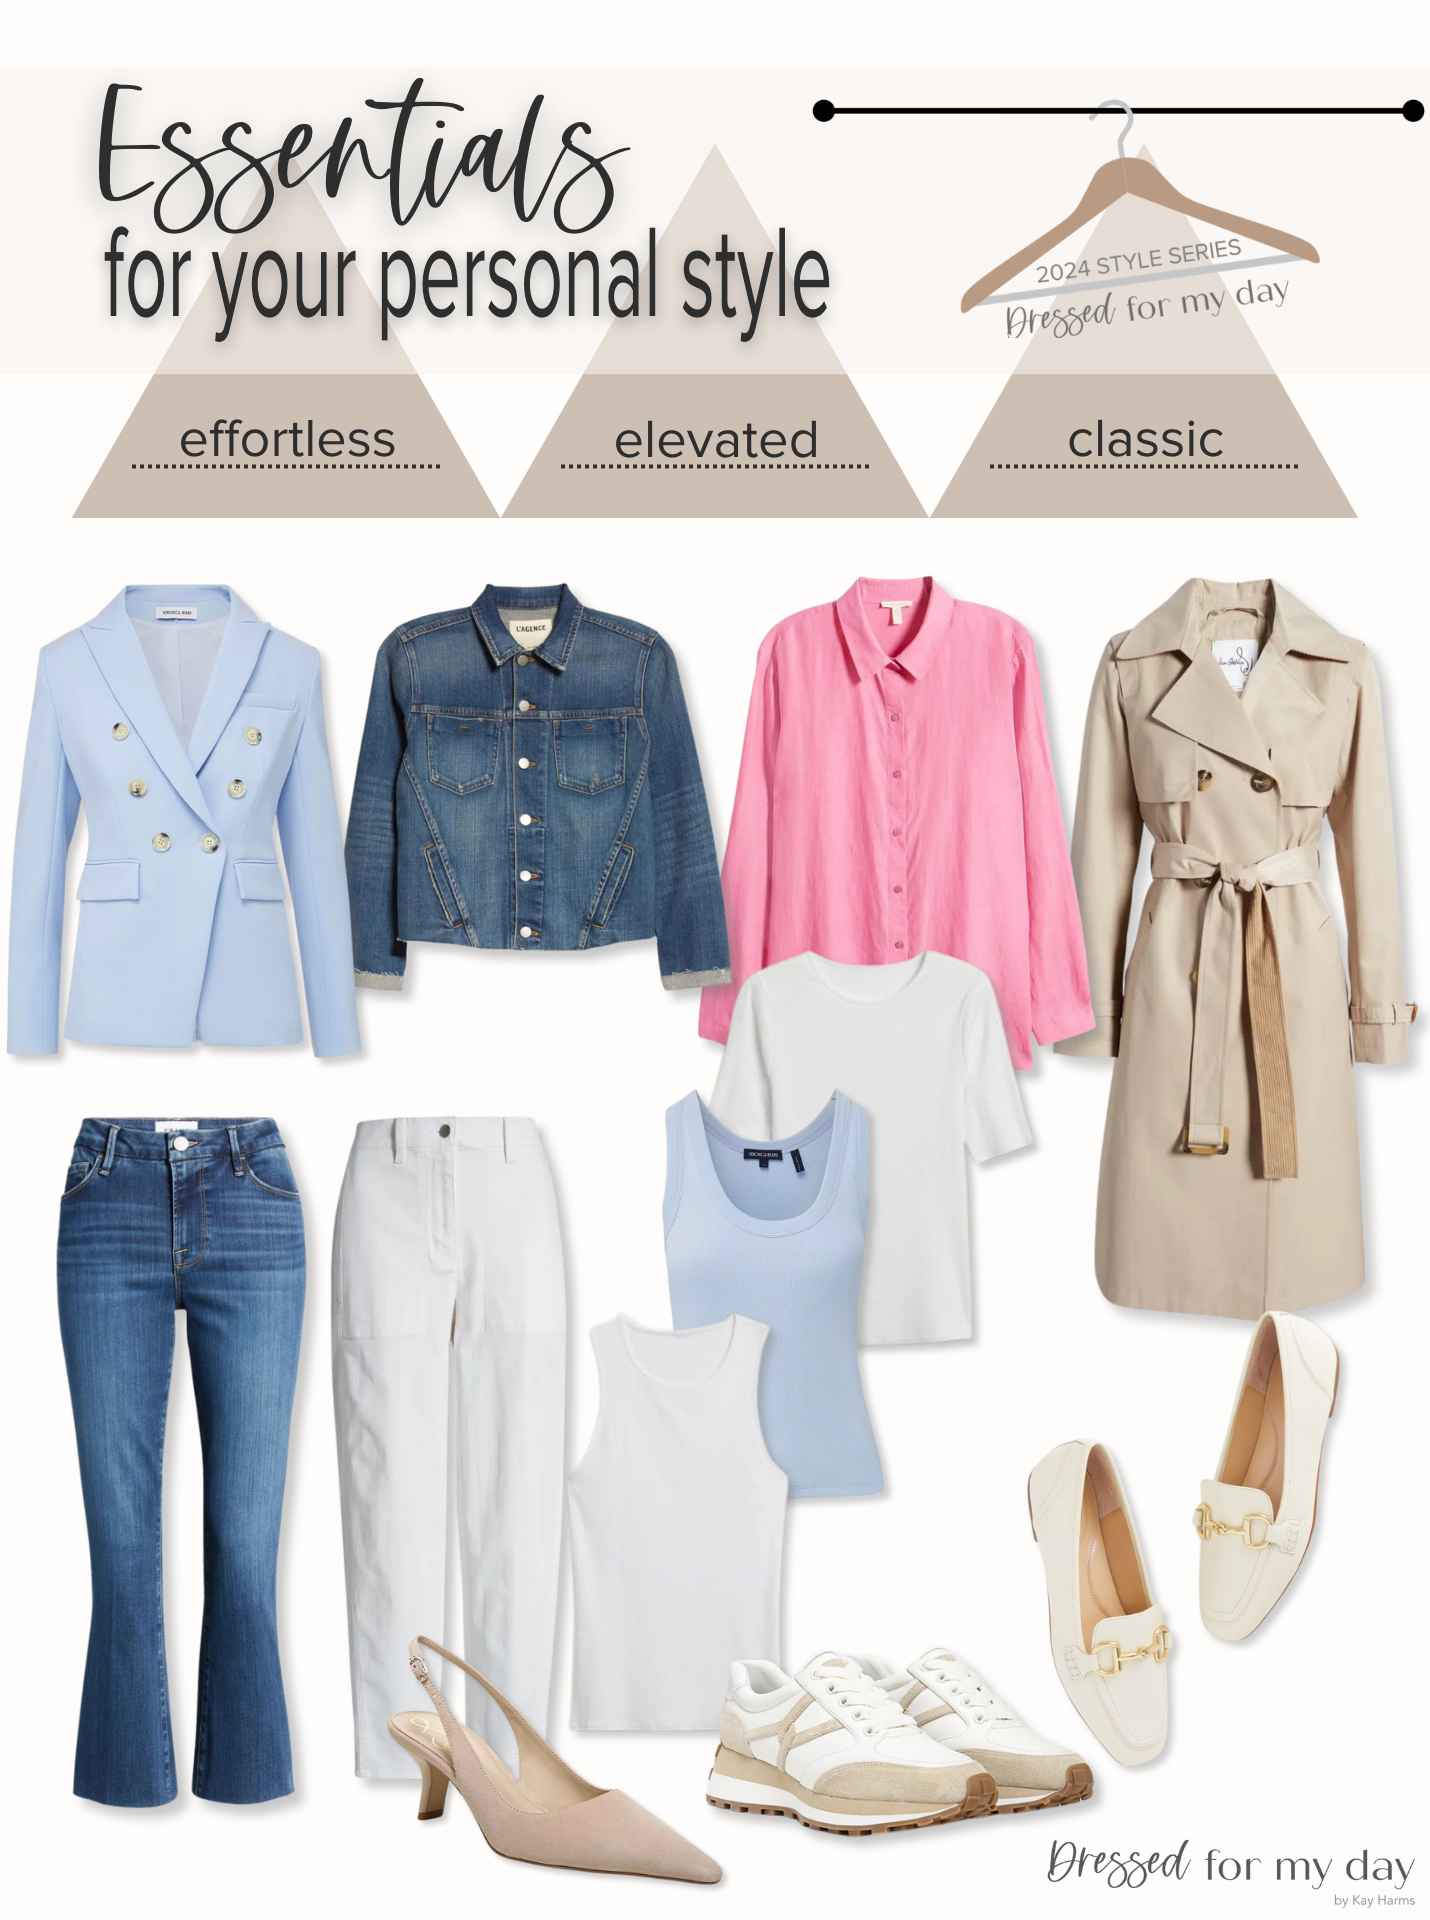 Work from Home Wardrobe Essentials - The Well Dressed Life